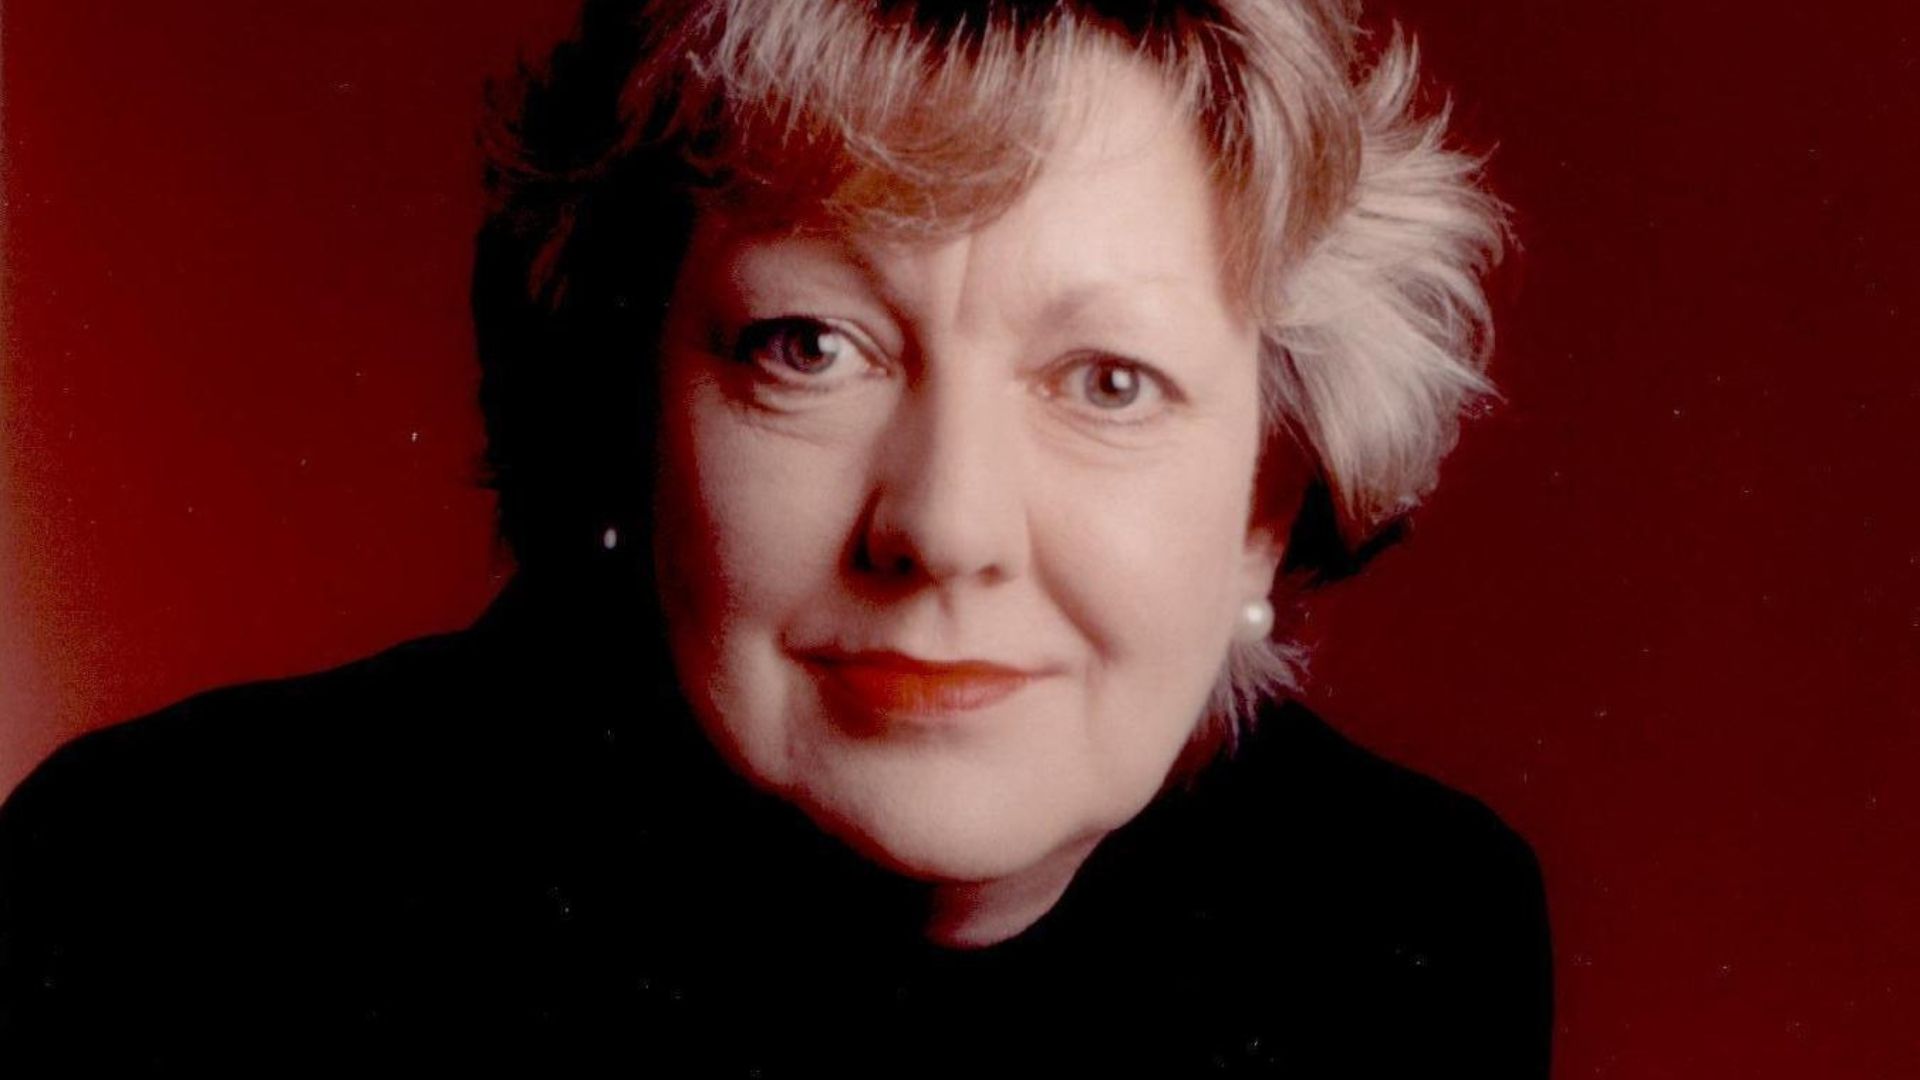 Janet Anderson